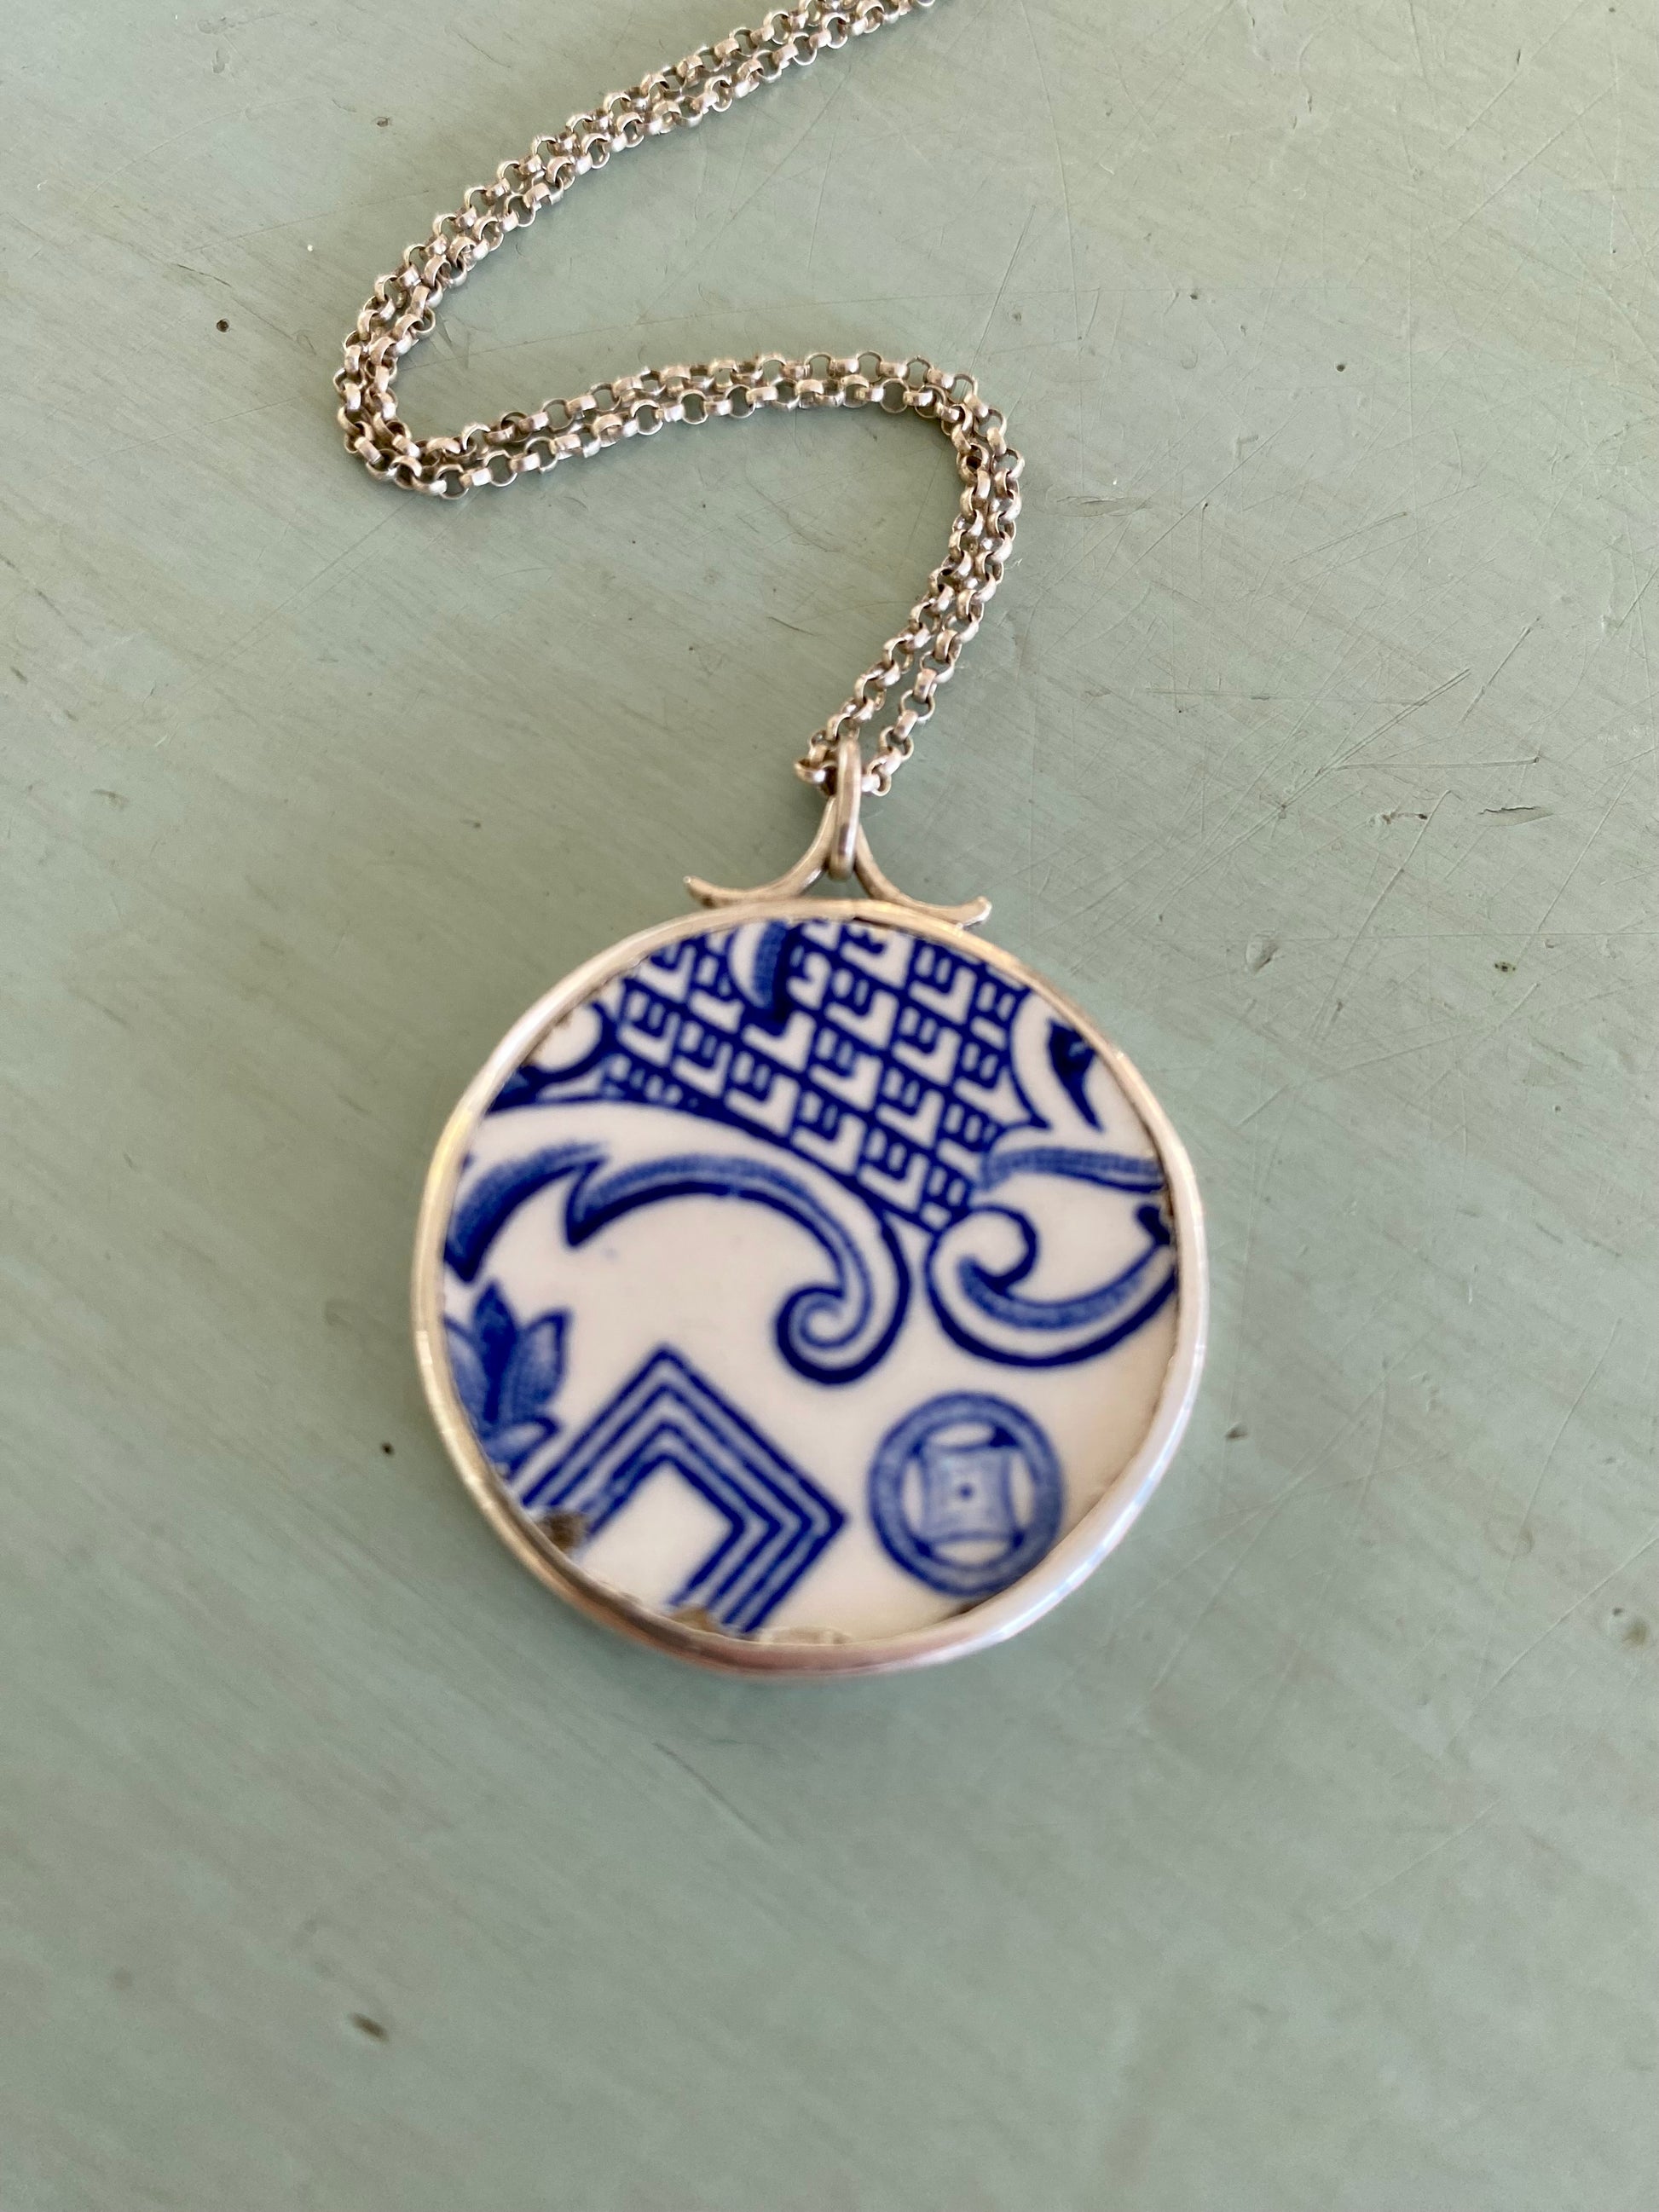 Elegant Willow Pattern Ceramic and Sterling Silver Pendant - Close-up View.